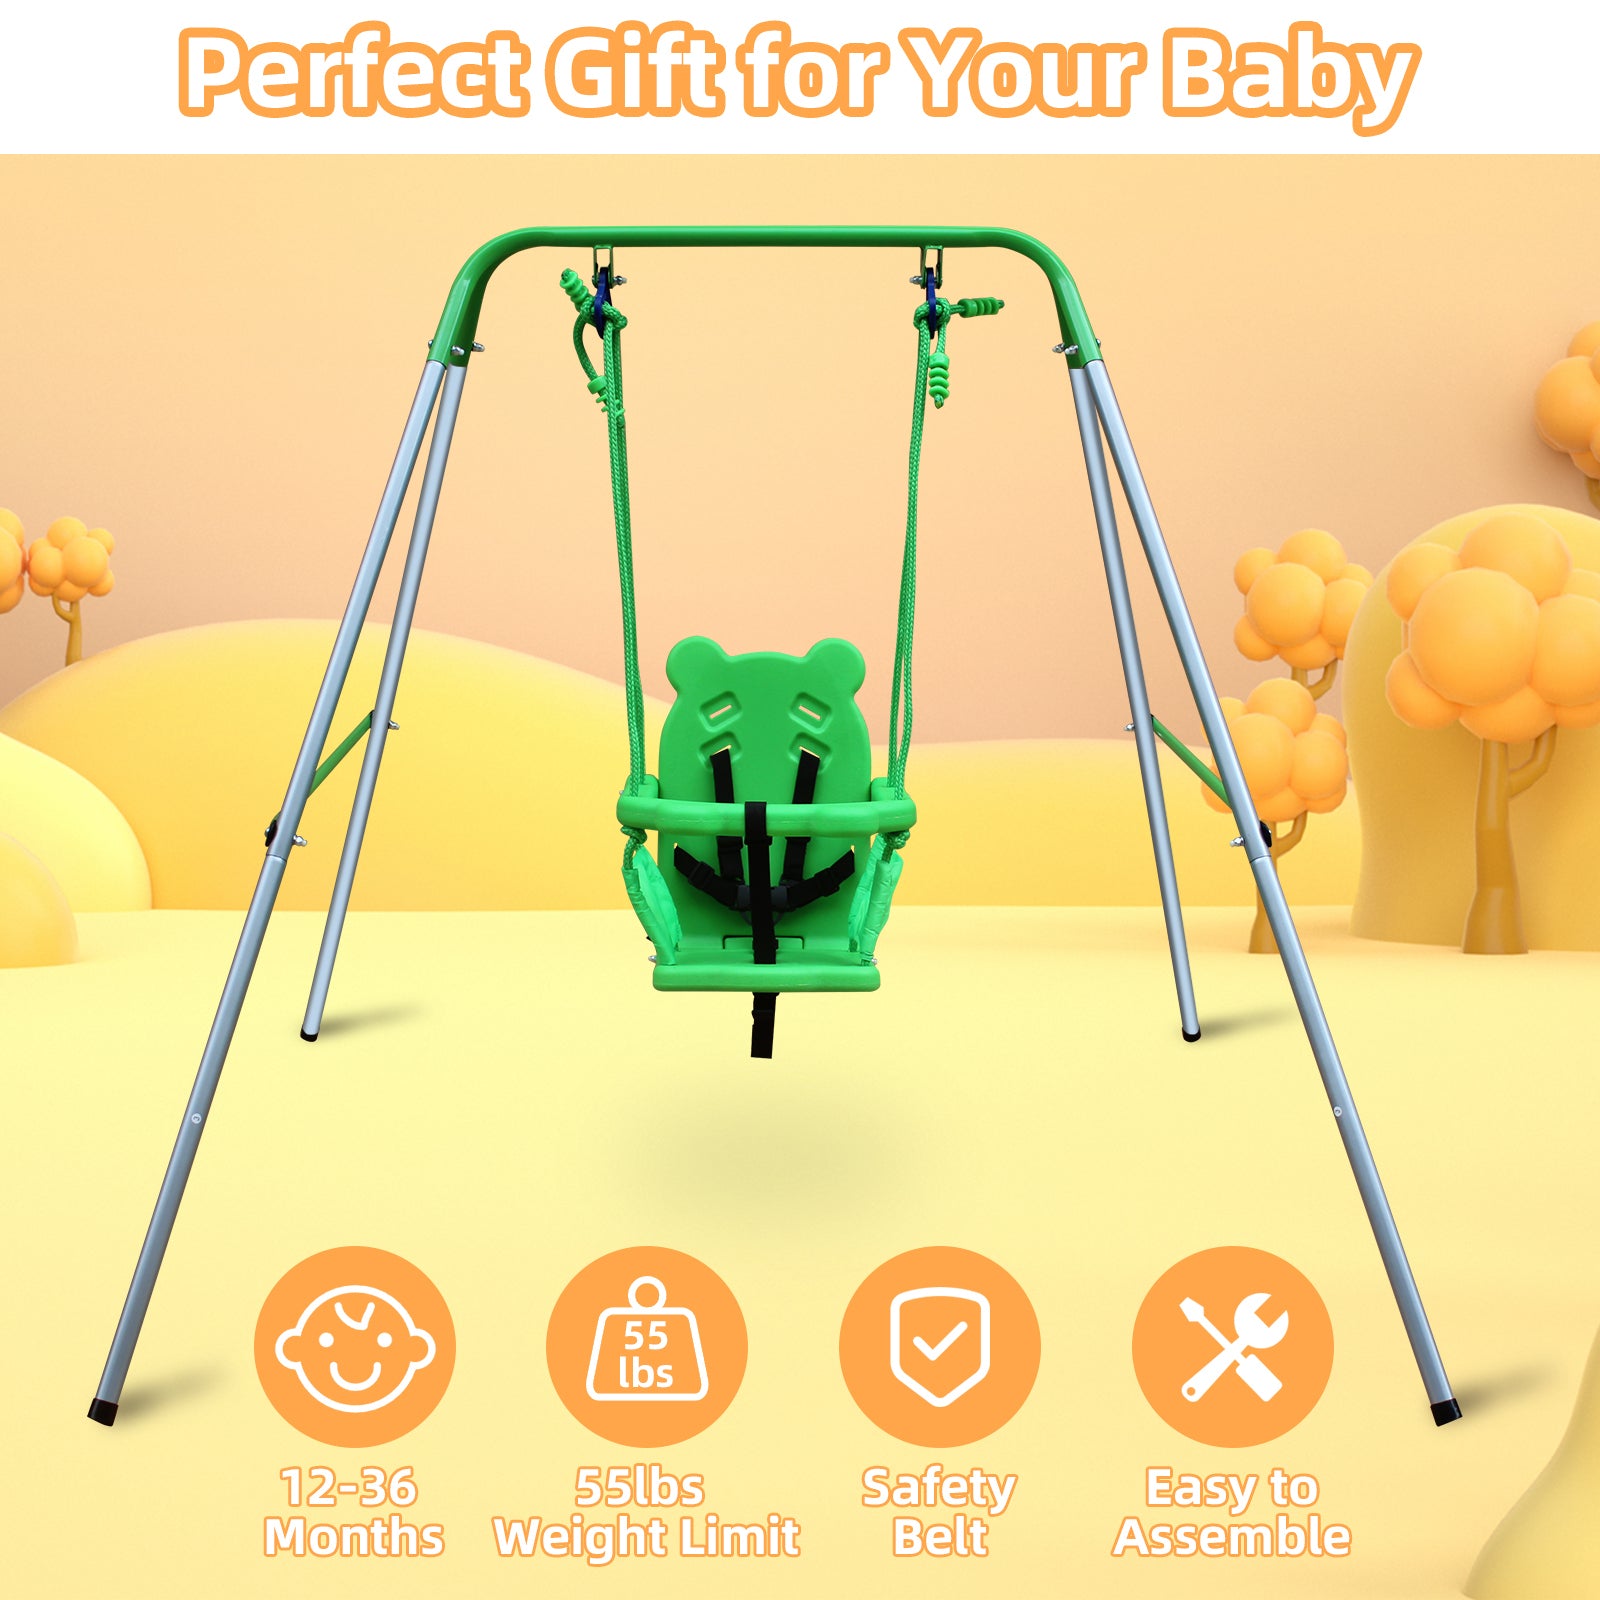 Toddler Baby Swing Set Indoor Outdoor Folding Metal Swing Frame with Safety Harness and Handrails for Backyard - Tonkn